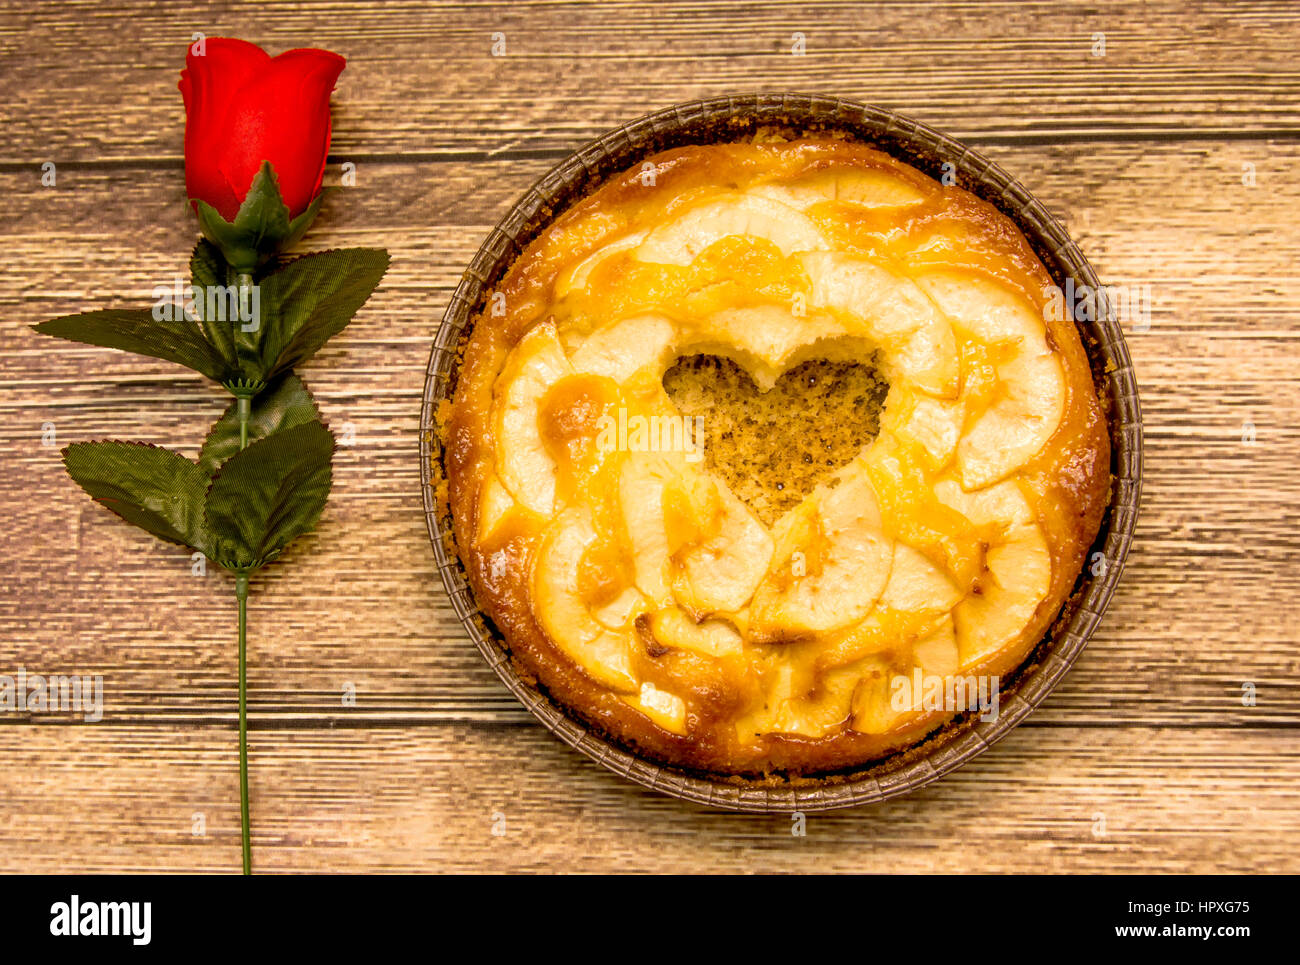 Apple pie with a hollow in the shape of a heart on a wooden table in which there is a red rose Stock Photo